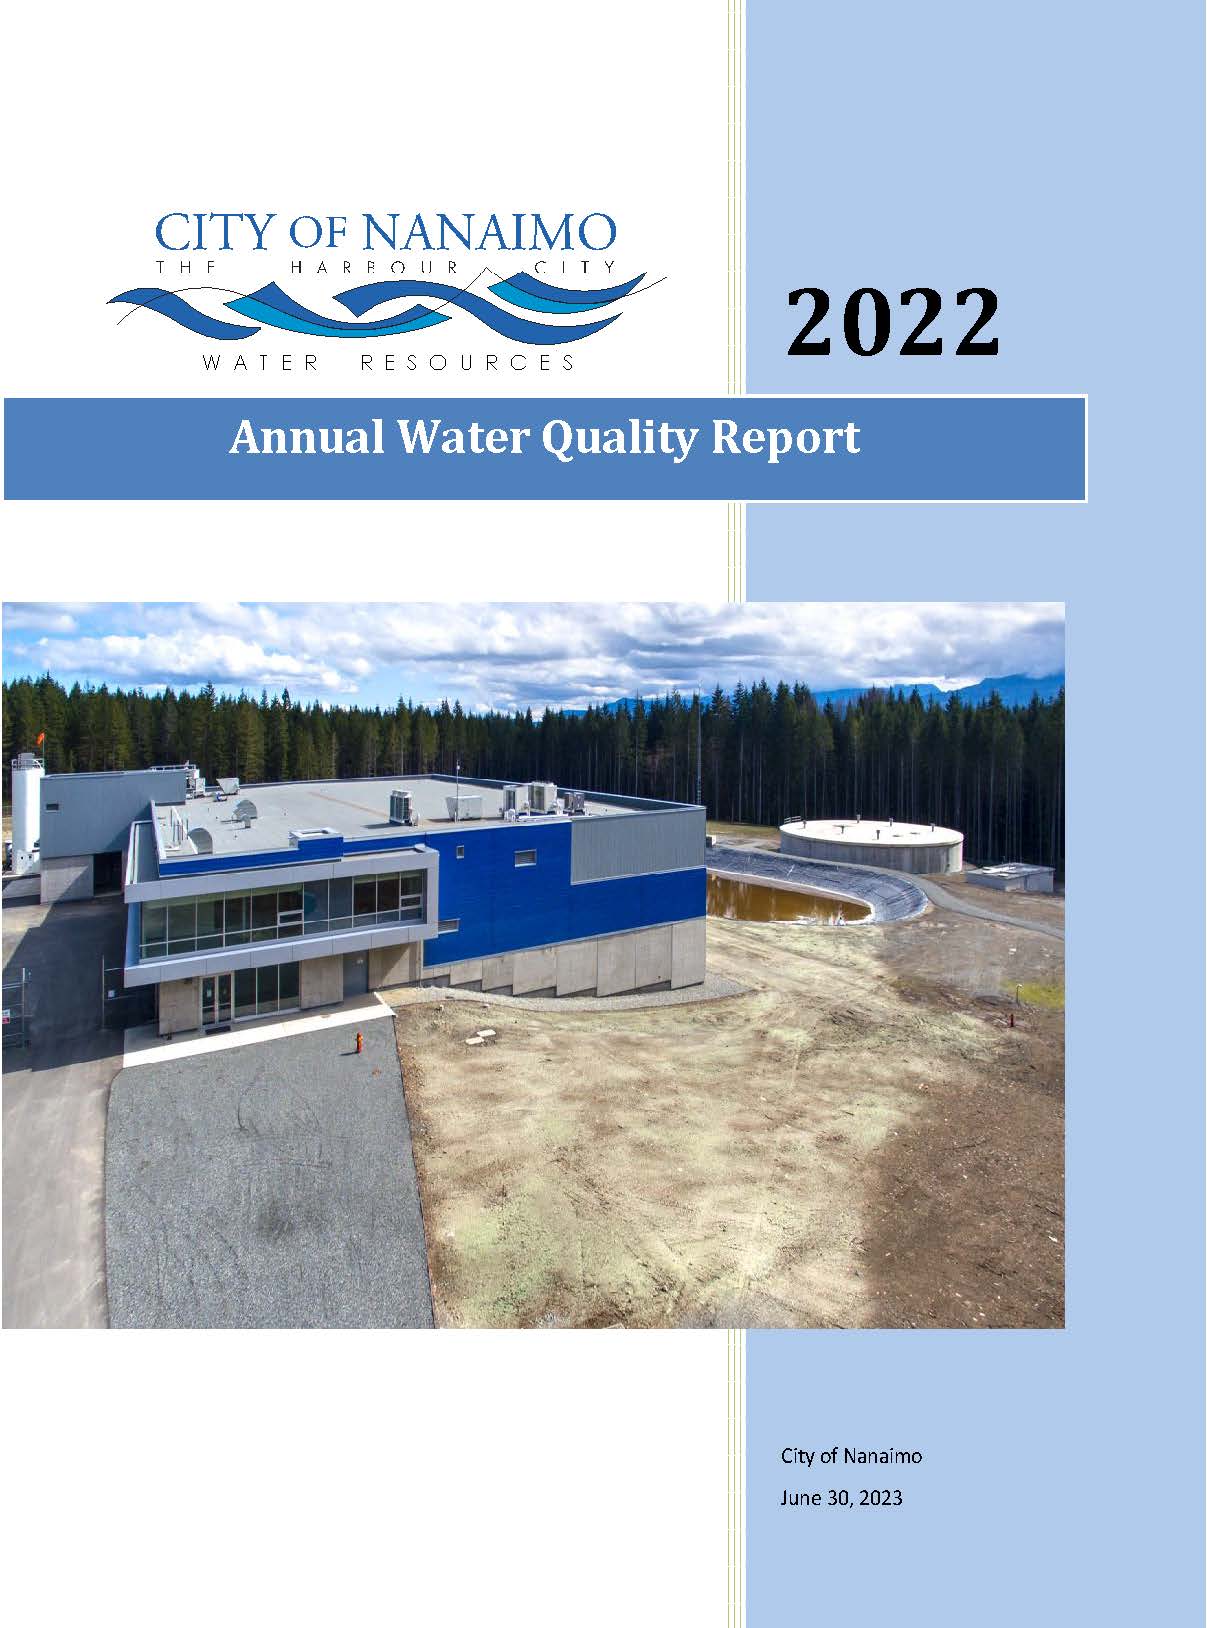 Annual Water Quality Report 2022